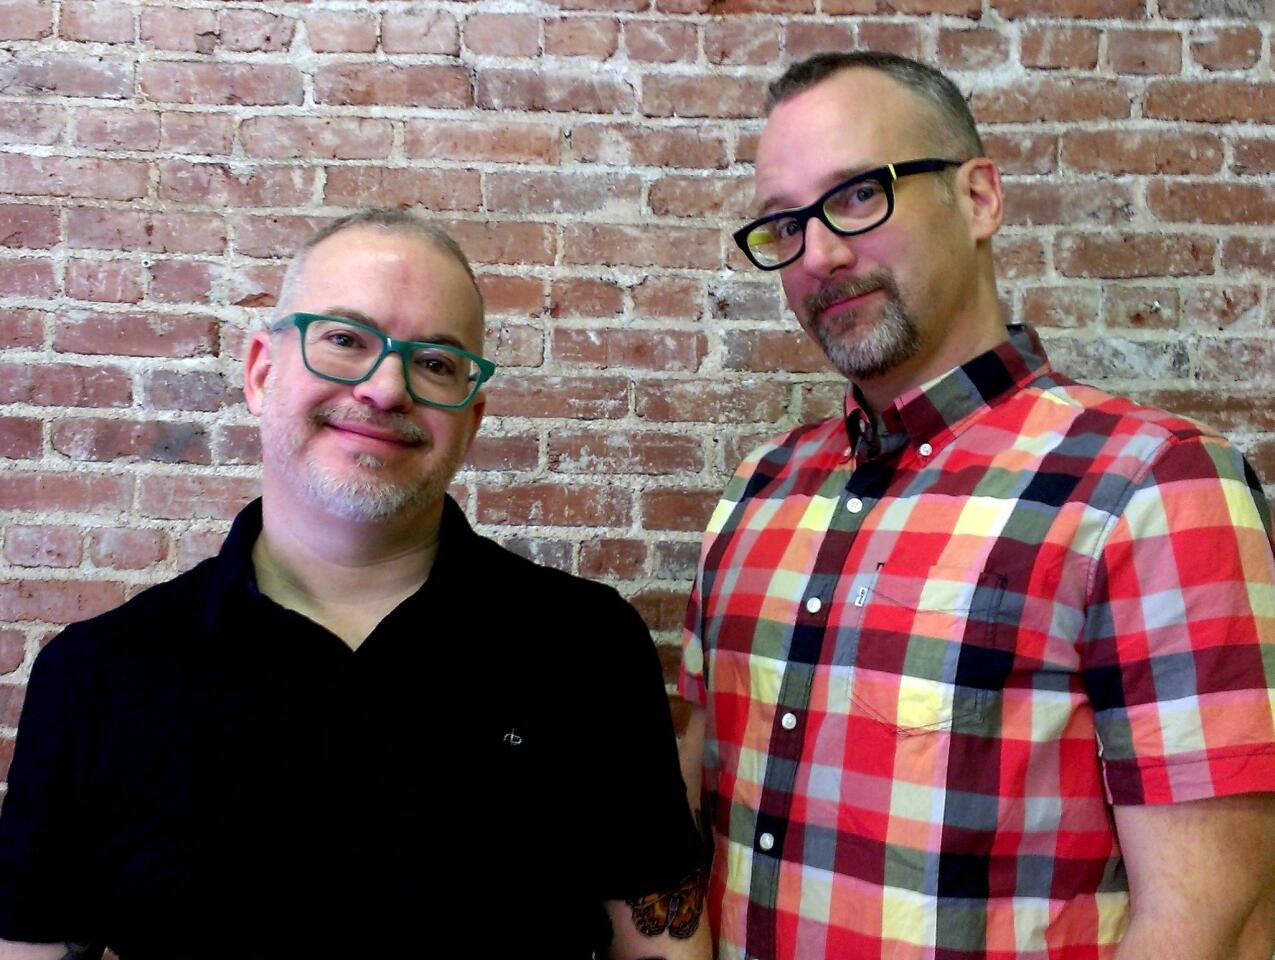 Bryan Petroff and David Quint are the owners of New York's Big Gay Ice Cream and will be opening their first L.A. ice cream store.